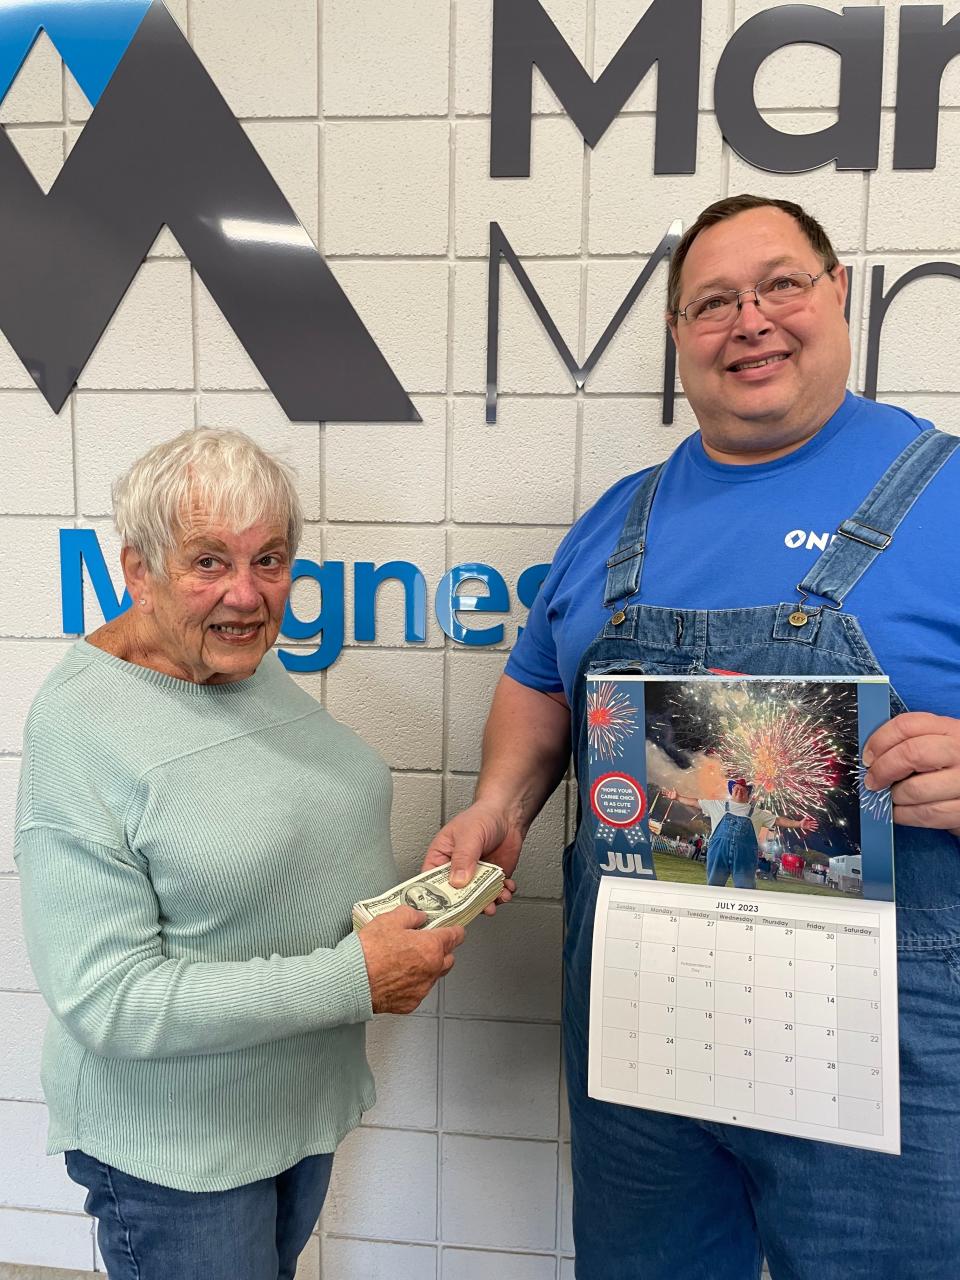 Alice Fork receives funds from Matt Hammer at Martin Marietta, where Hammer works. He collected donations from a calendar from a calendar fundraiser to aid the Good Samaritan Council.